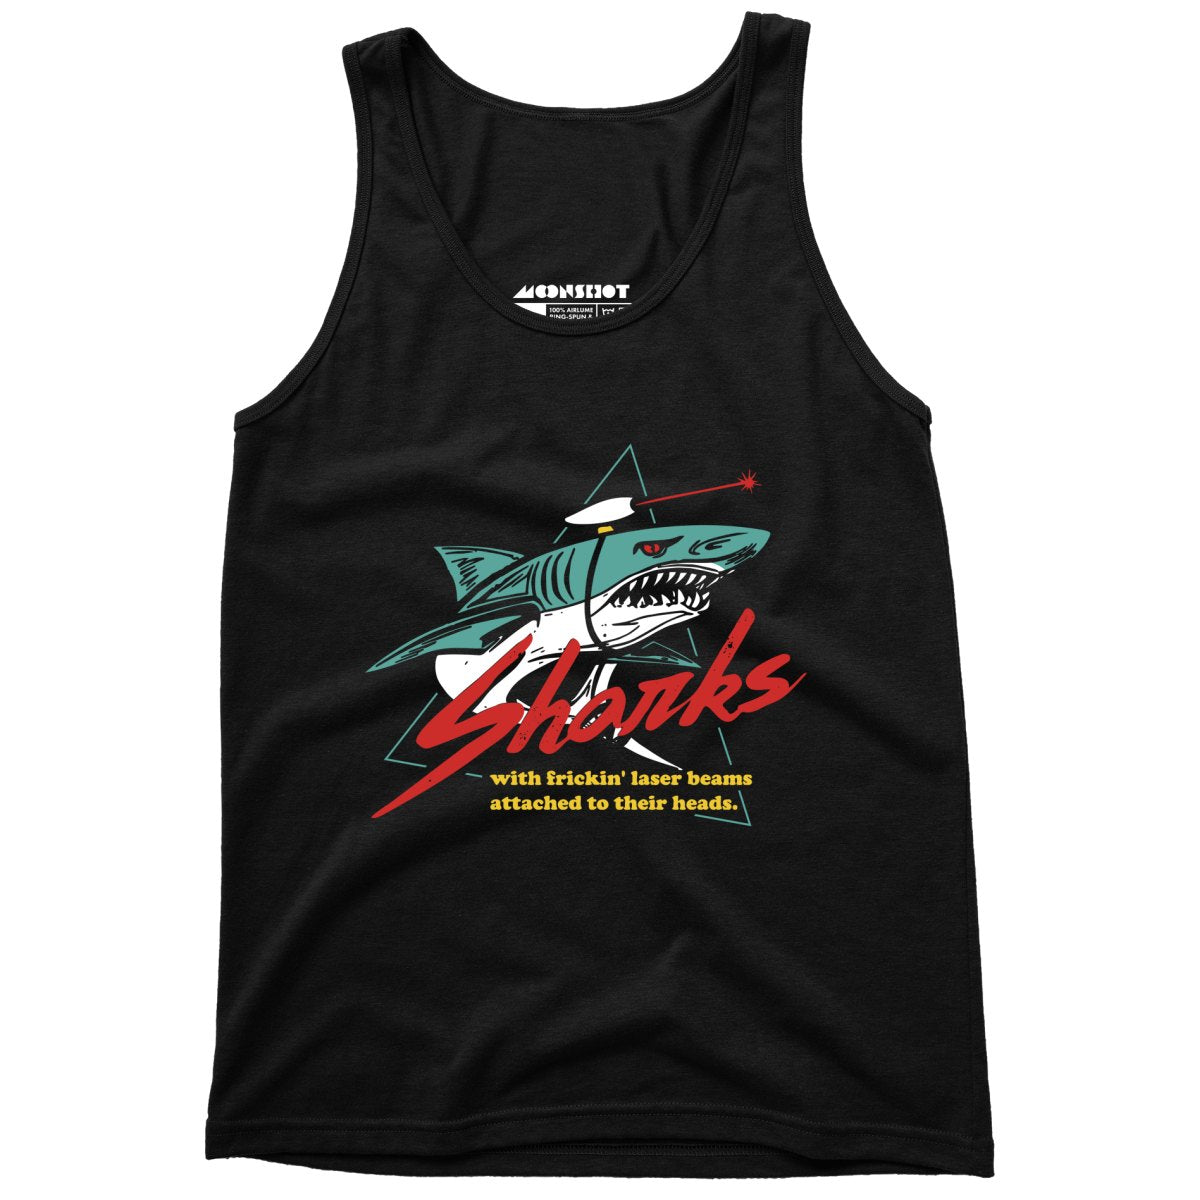 Sharks With Frickin' Laser Beams Attached to Their Heads - Unisex Tank Top